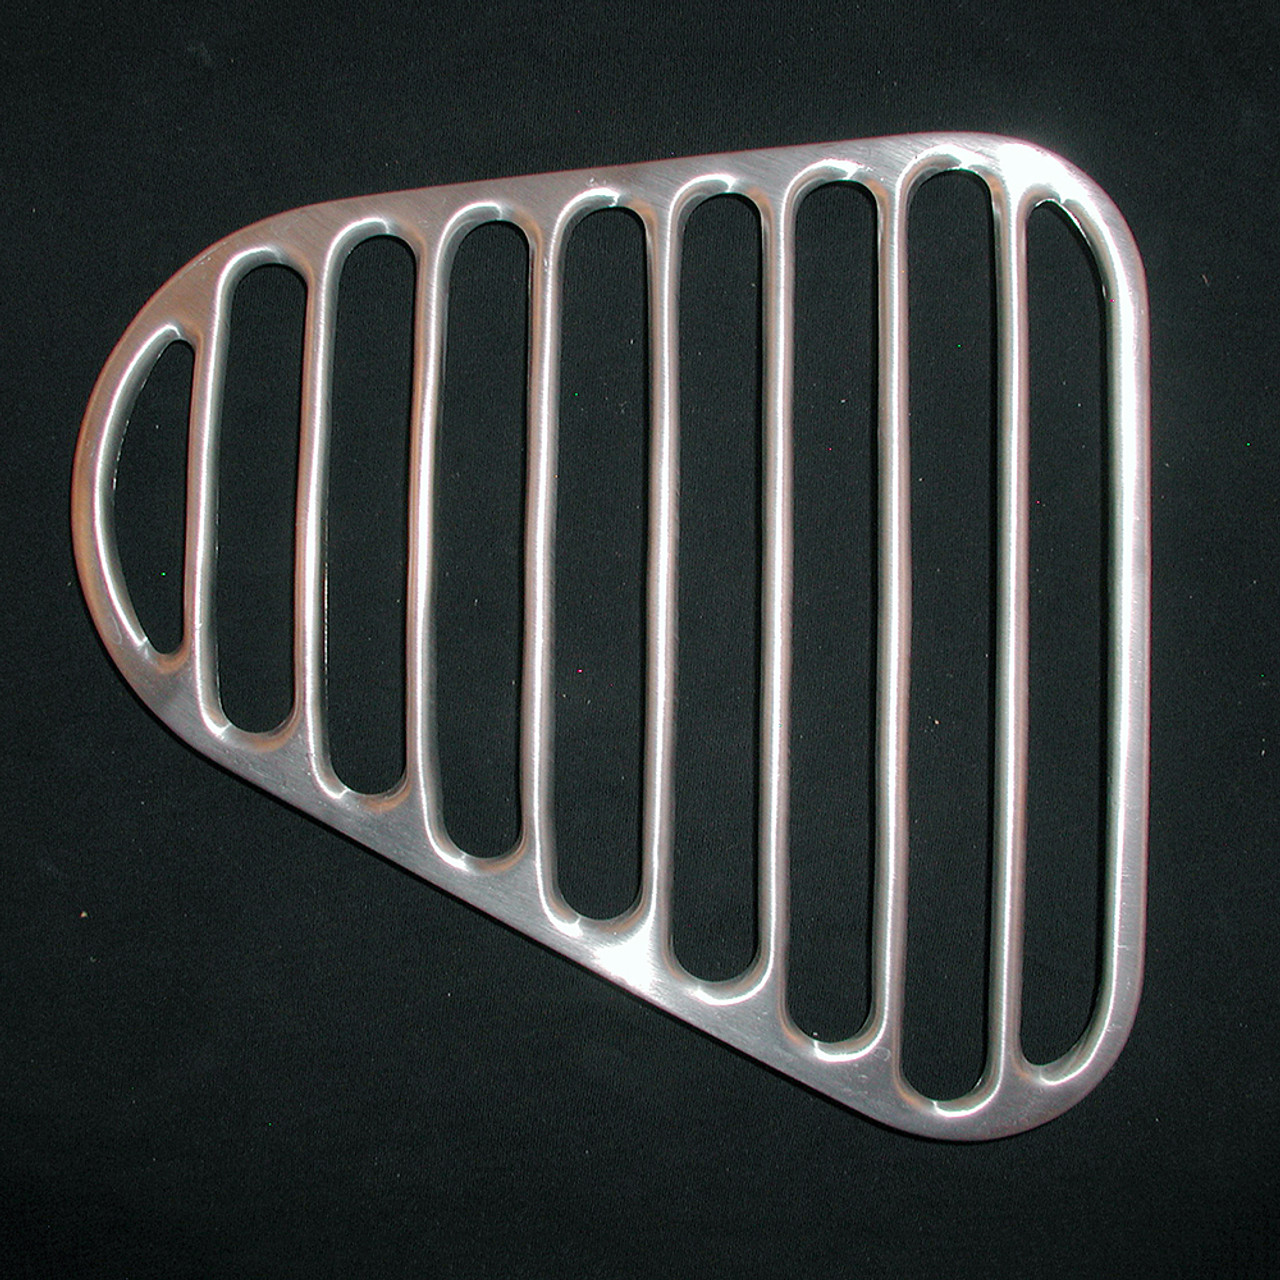 UB-6074-R   TAYLORCRAFT NOSE COWL GRILLE - RIGHT